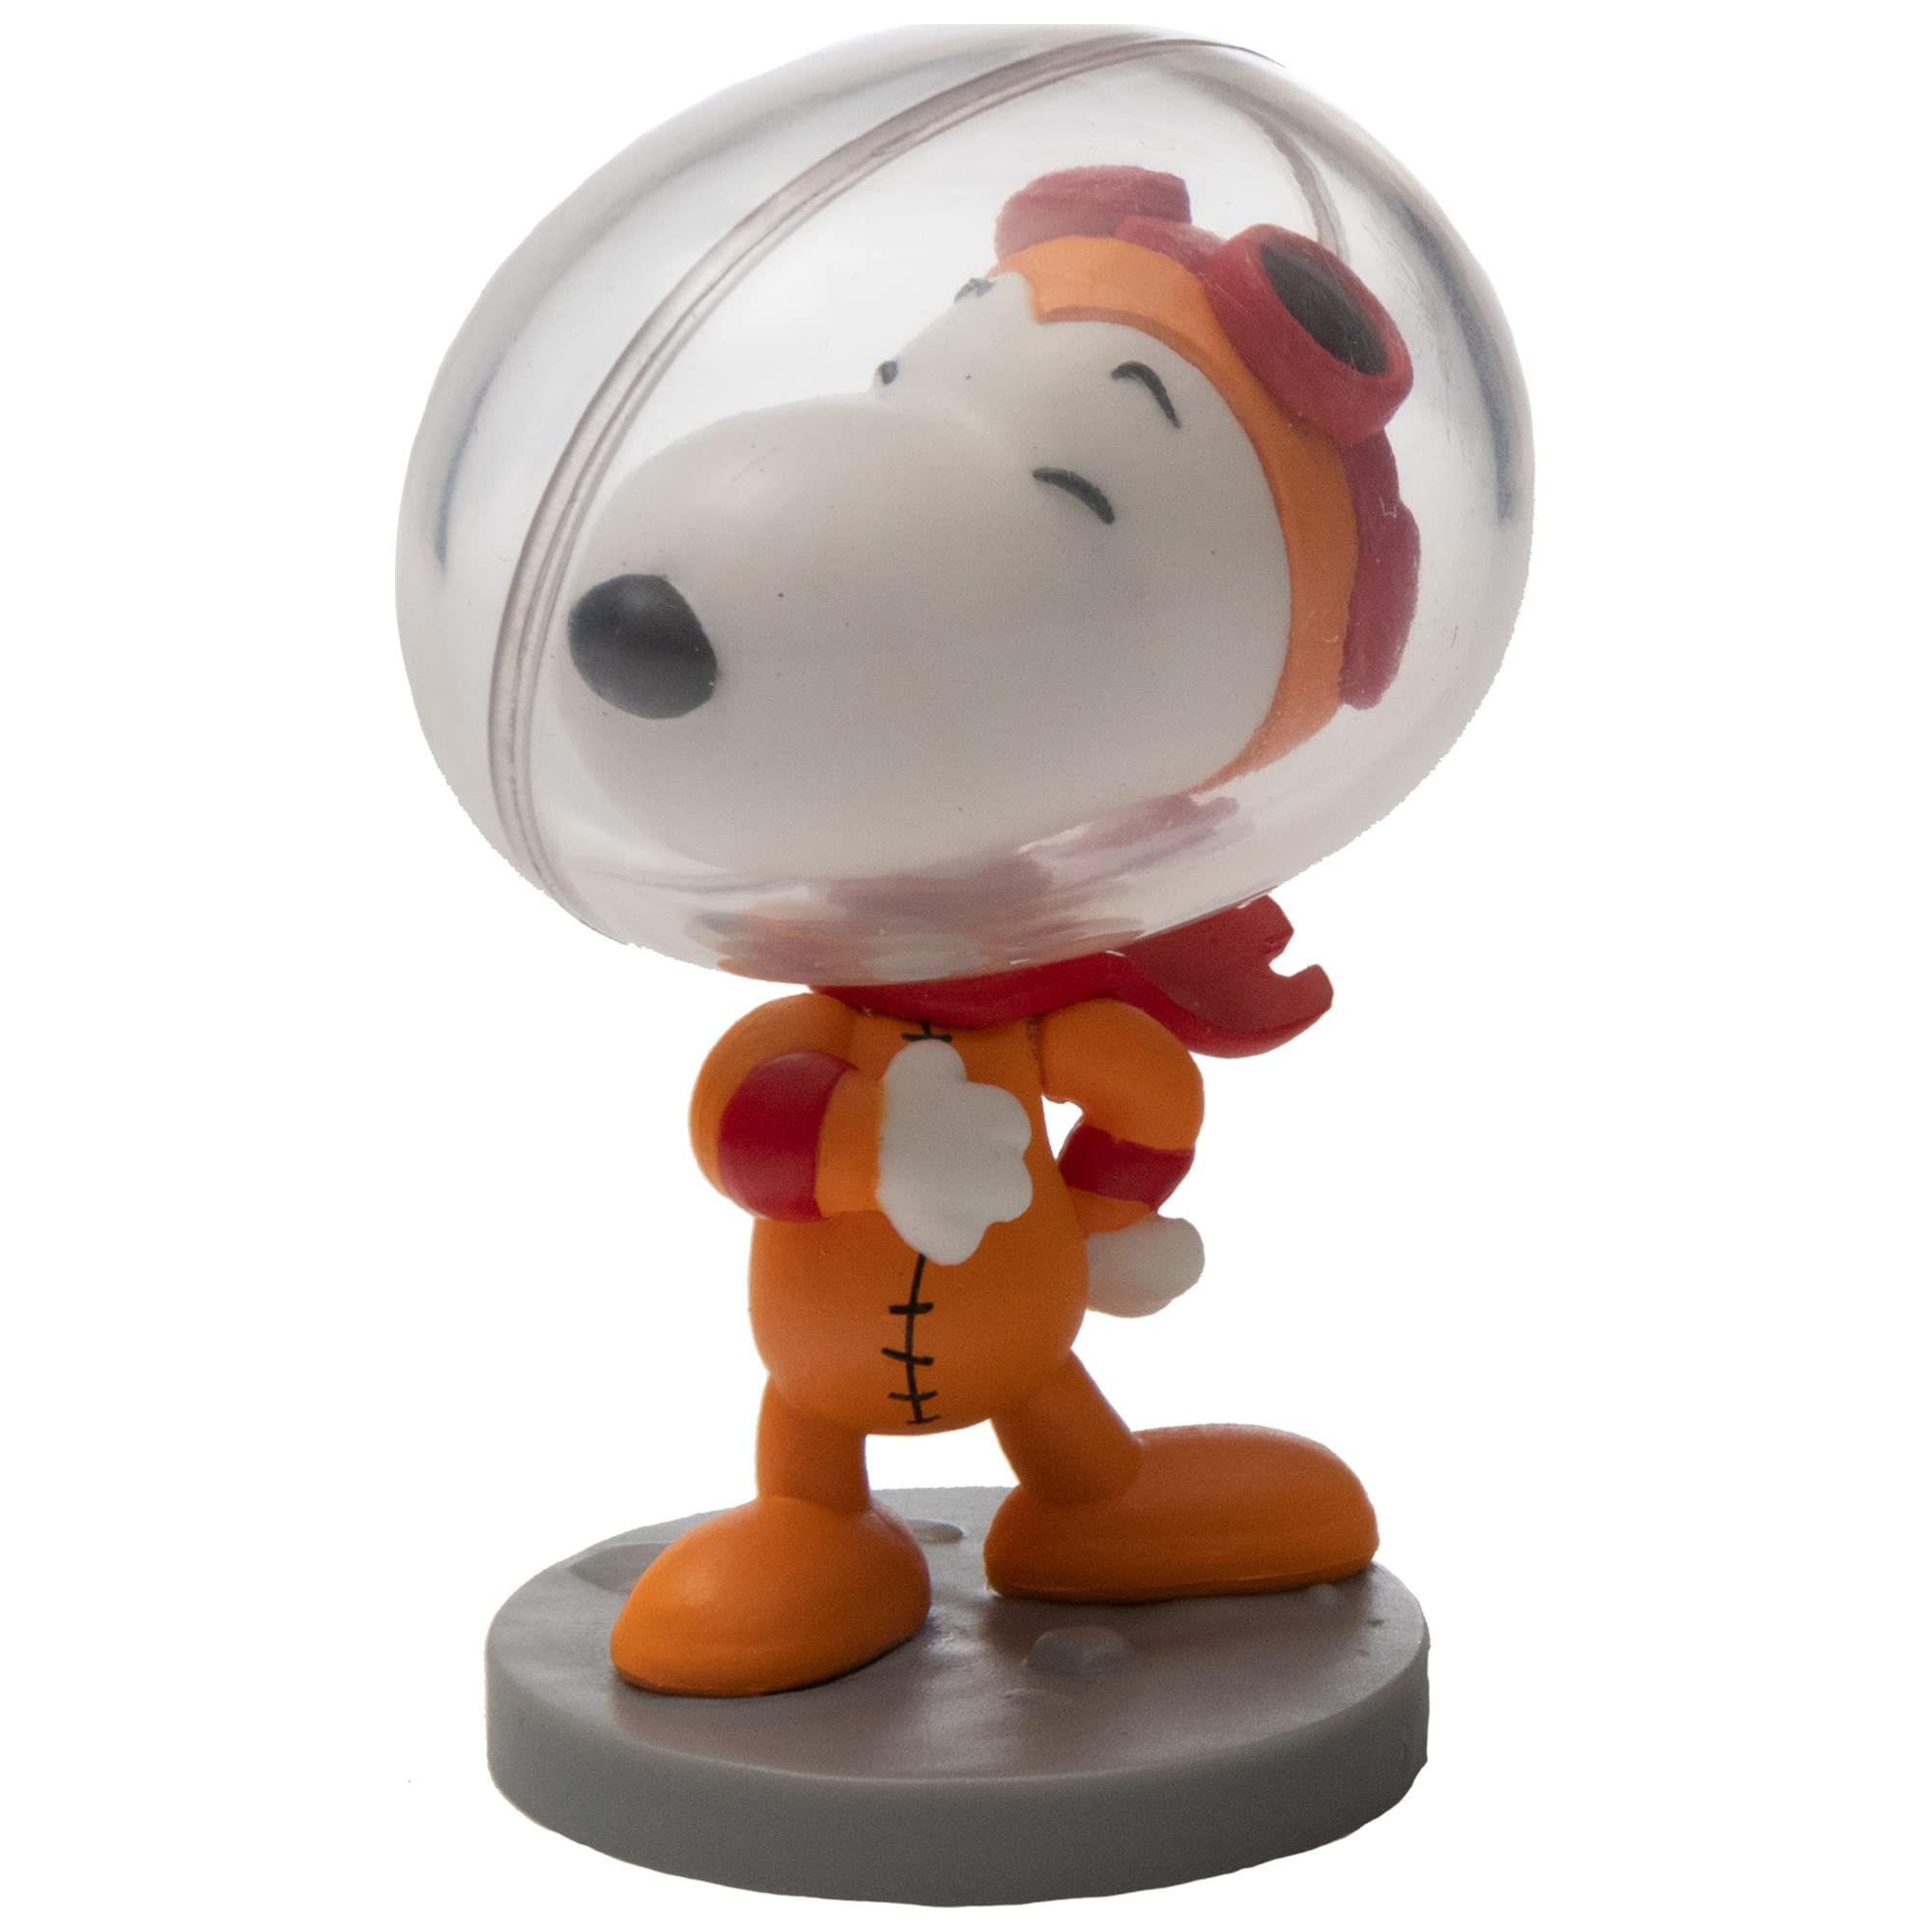 Complete Set of 4 Snoopy in Space 3.5-in Collectible Vinyl Sculpture Figures